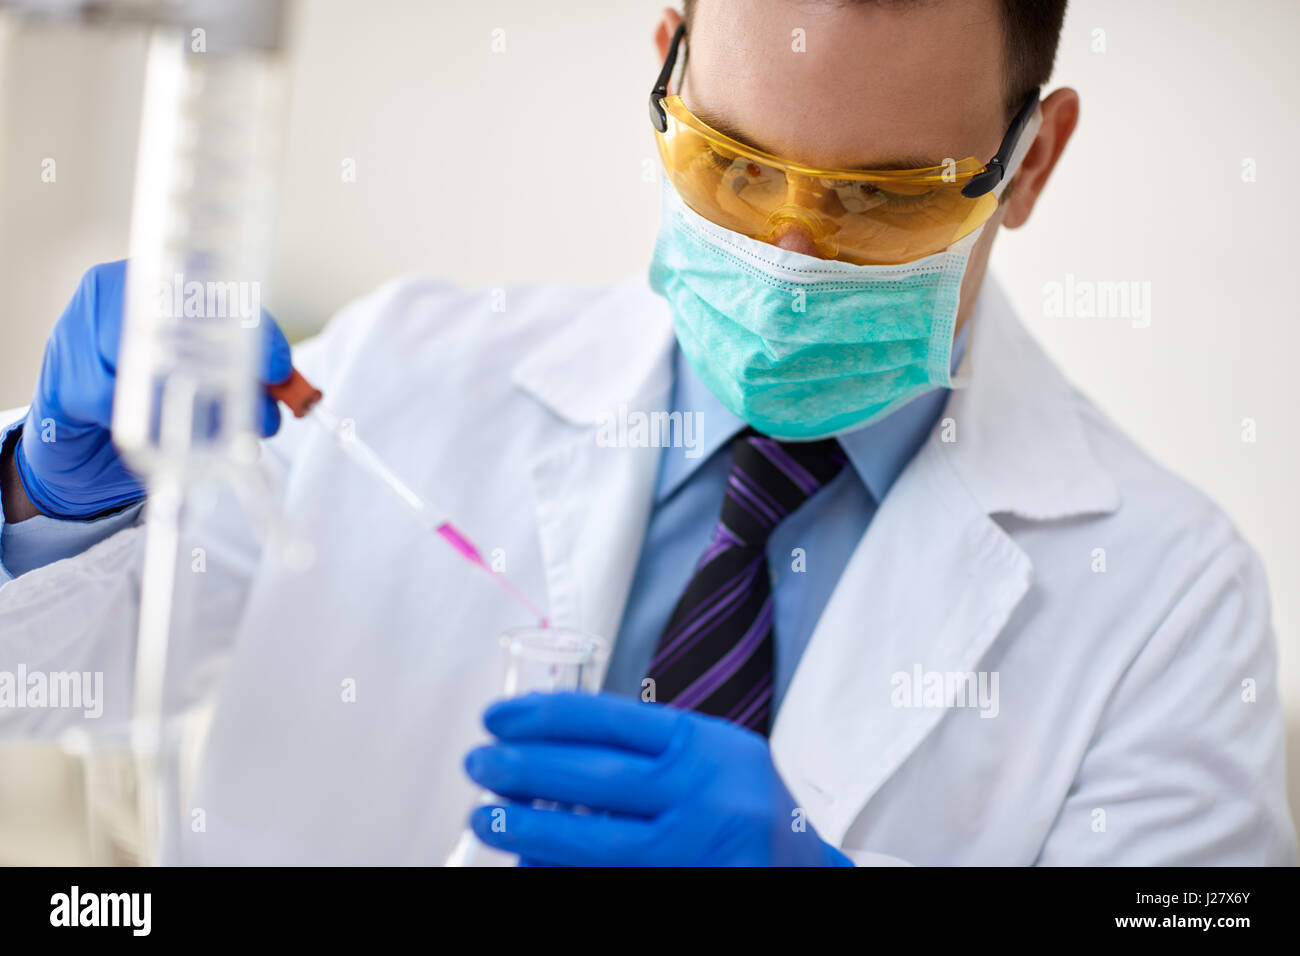 Scientist performing experiment in chemistry lab Stock Photo